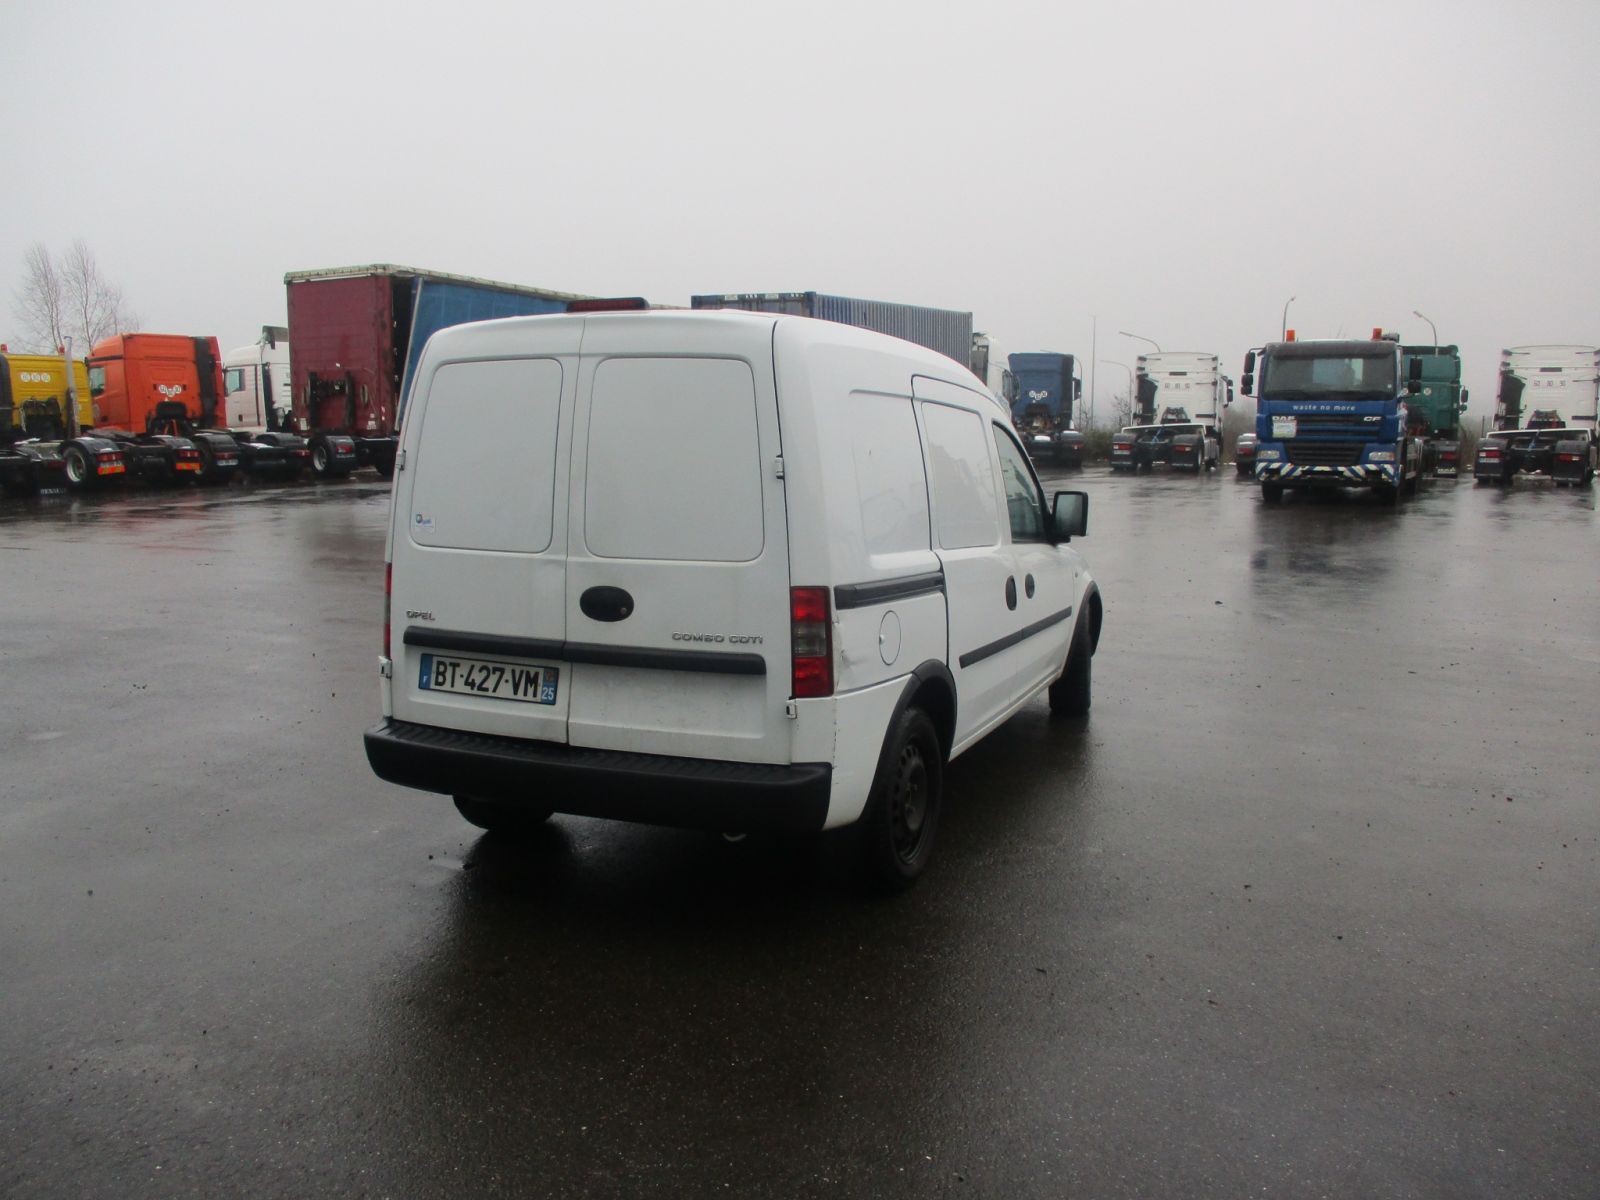 Vente occasion  Divers - OPEL Combo 1.3 CDTI  FOURGON (Belgique - Europe) - Houffalize Trading s.a.